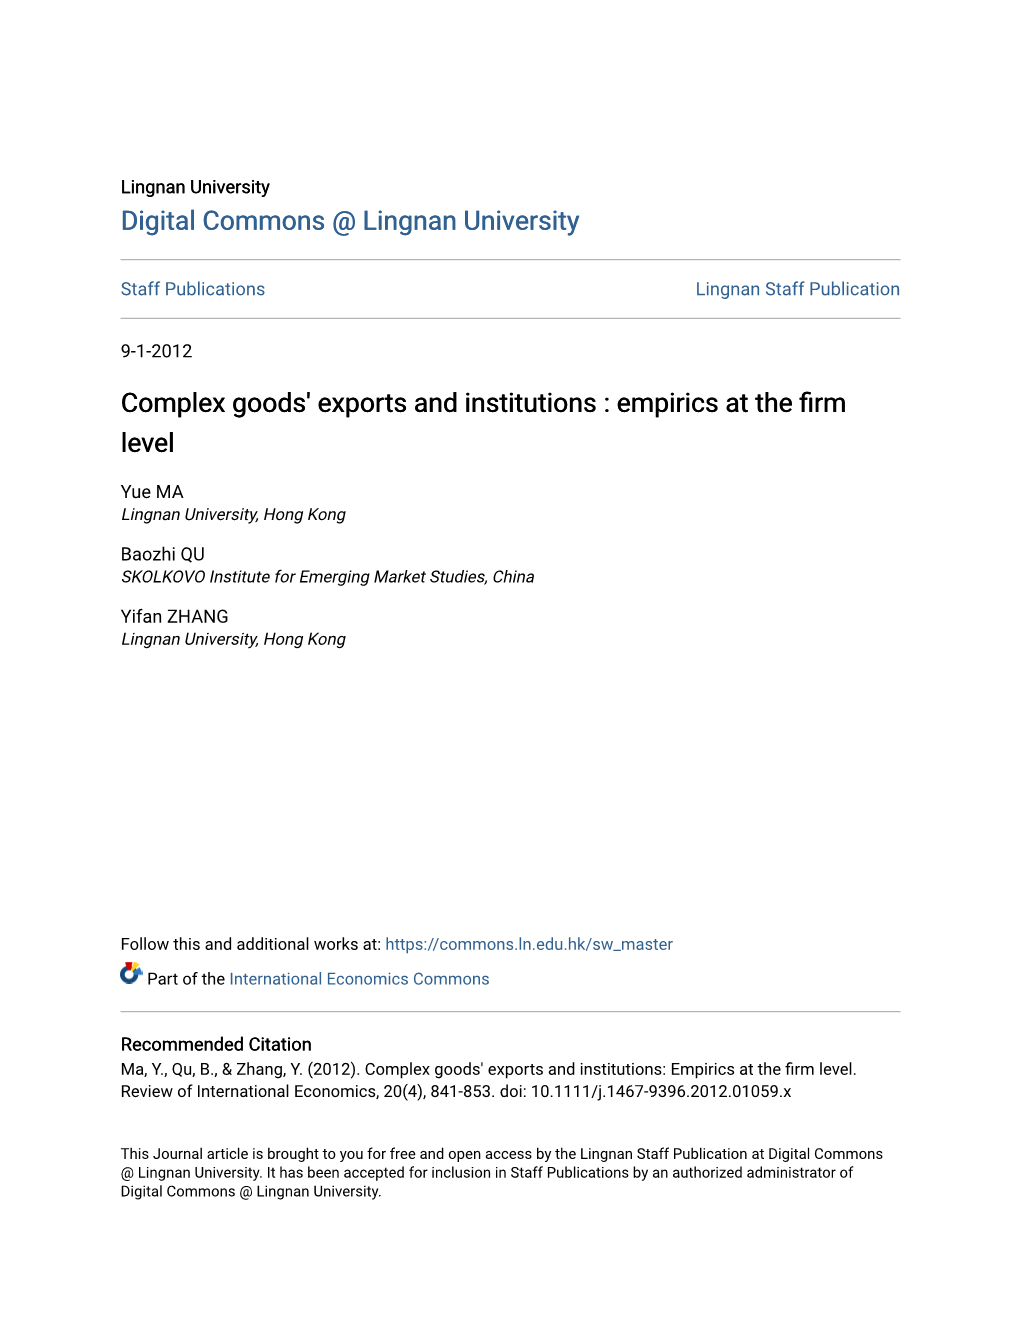 Complex Goods' Exports and Institutions : Empirics at the Firm Level